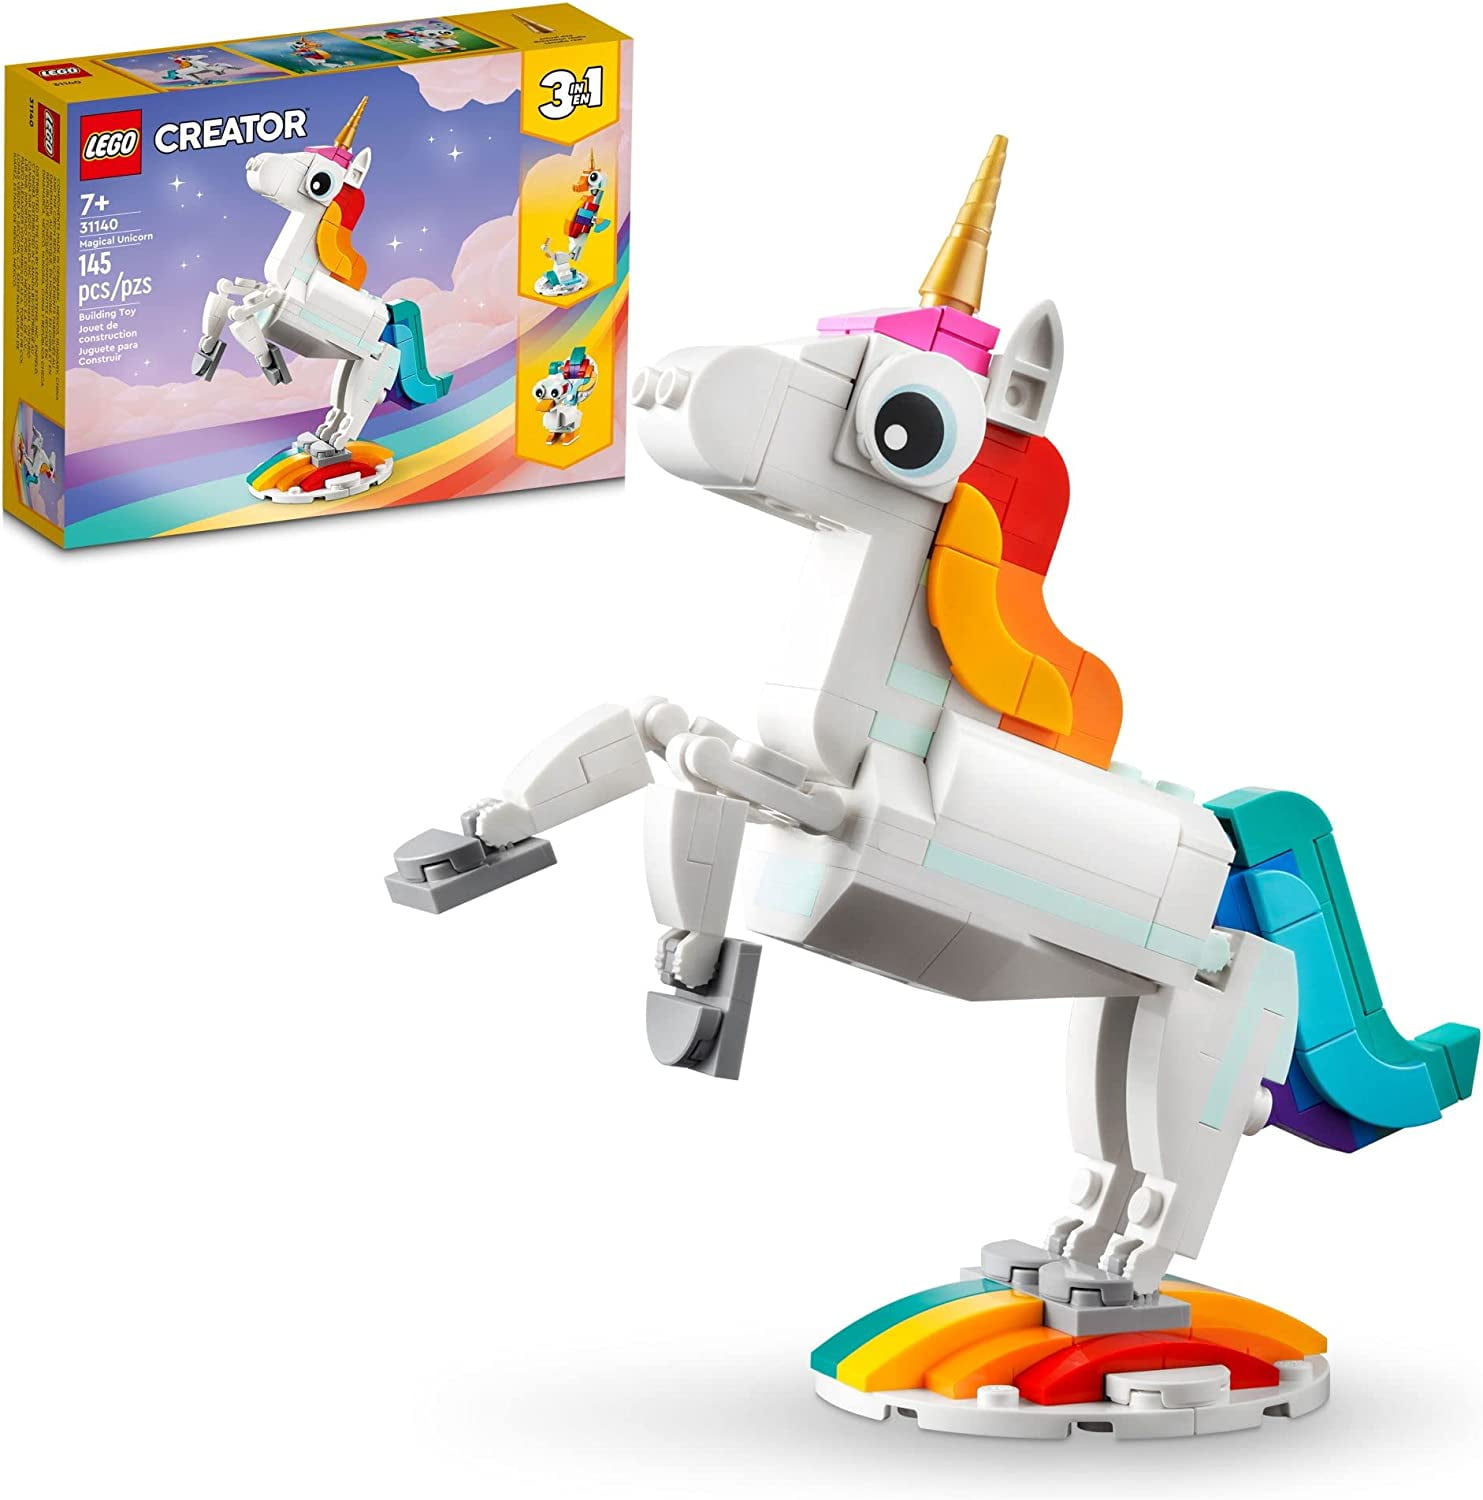 LEGO Creator 3 in 1 Magical Unicorn Toy to Seahorse to Peacock, Rainbow Animal Figures, Unicorn Gift for Girls and Boys, Buildable Toys, 31140 $9.97